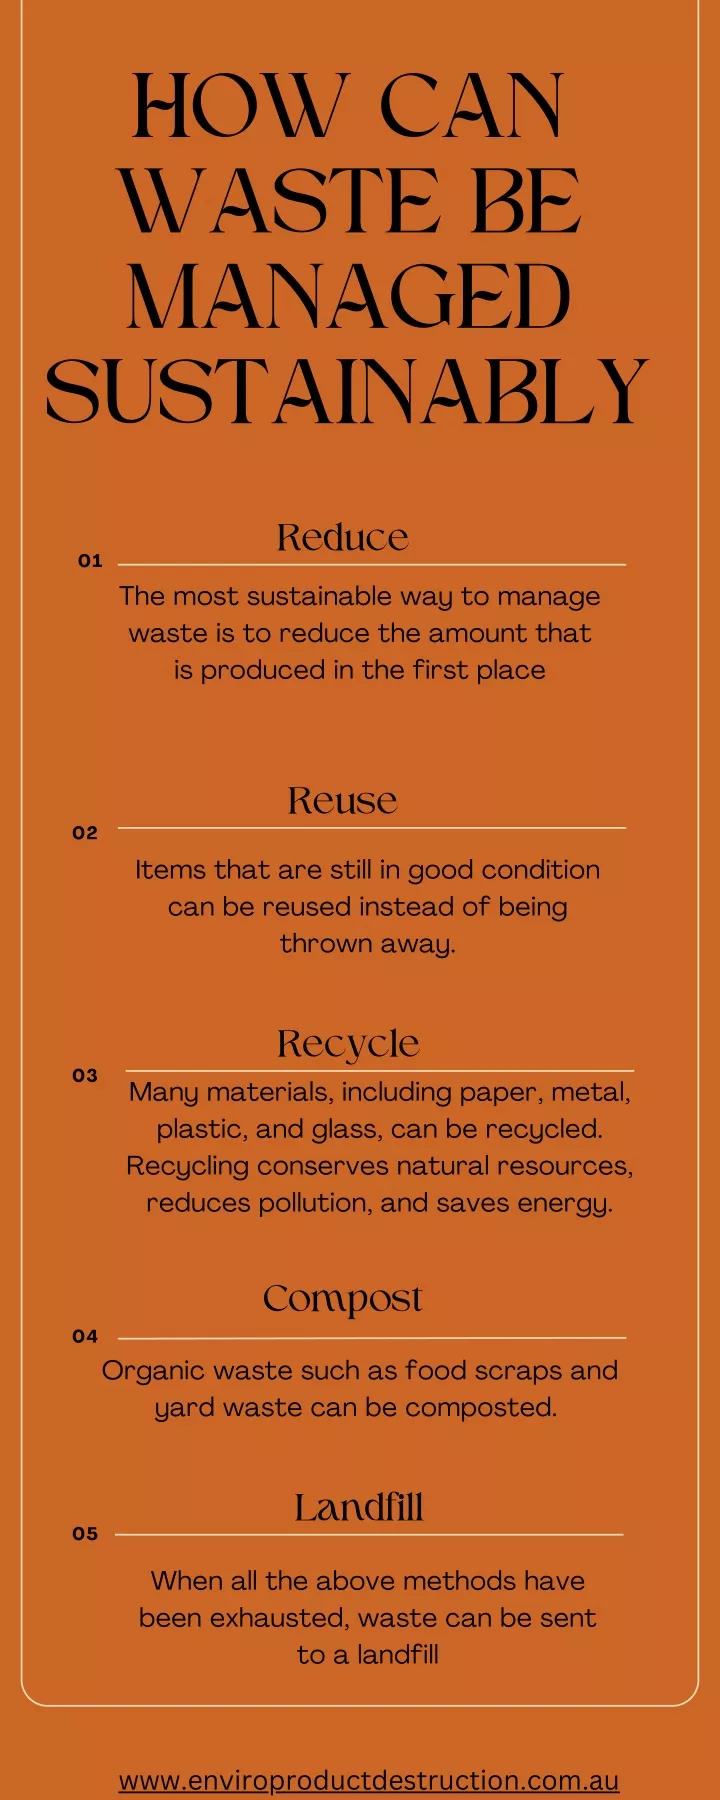 how can waste be managed sustainably